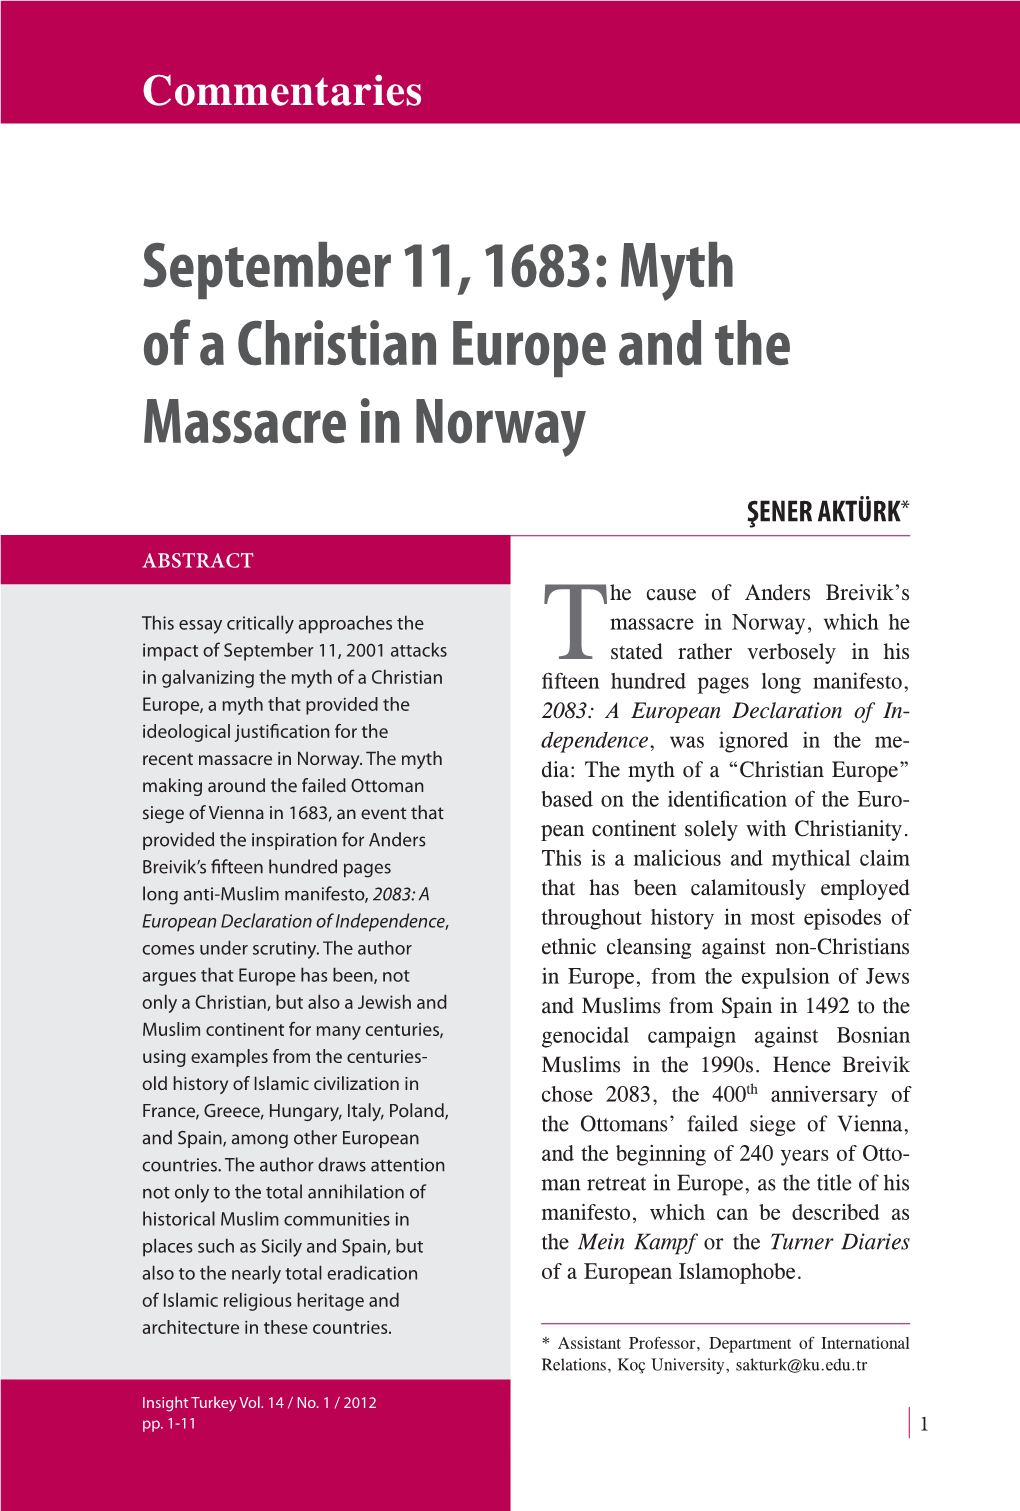 Myth of a Christian Europe and the Massacre in Norway